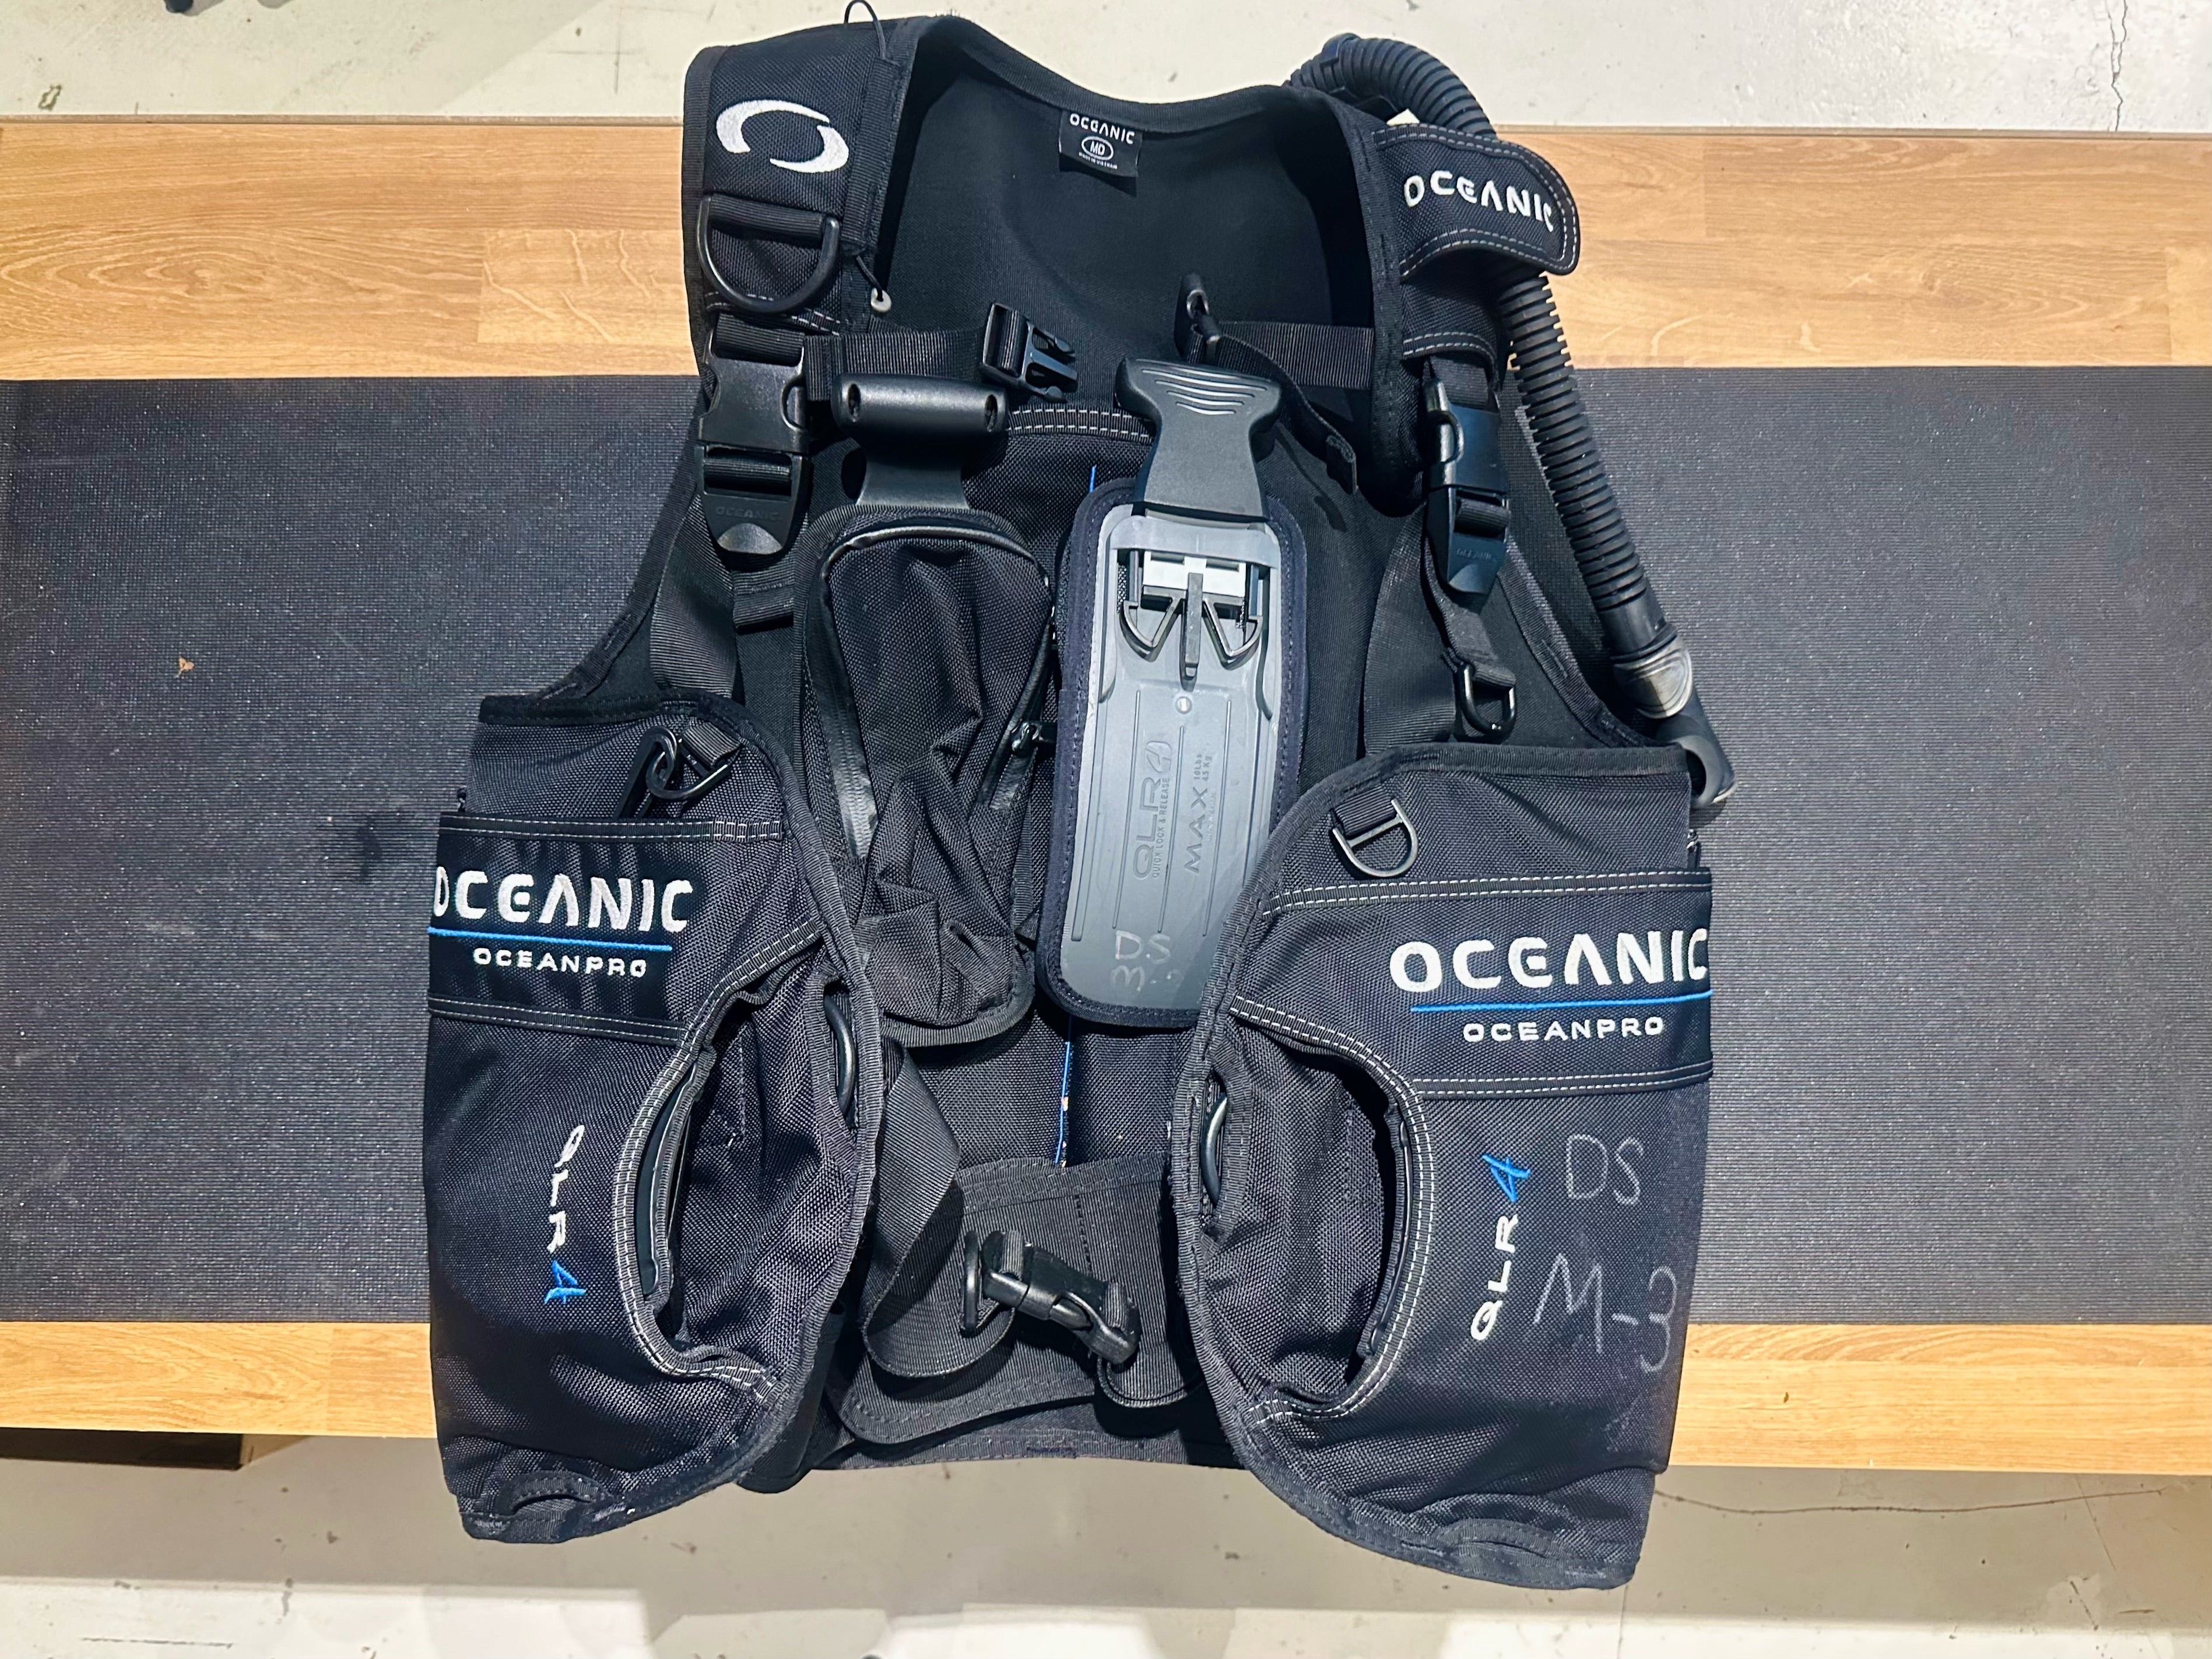 Oceanic OceanPro Used Size Medium | Diving Sports Canada | Vancouver